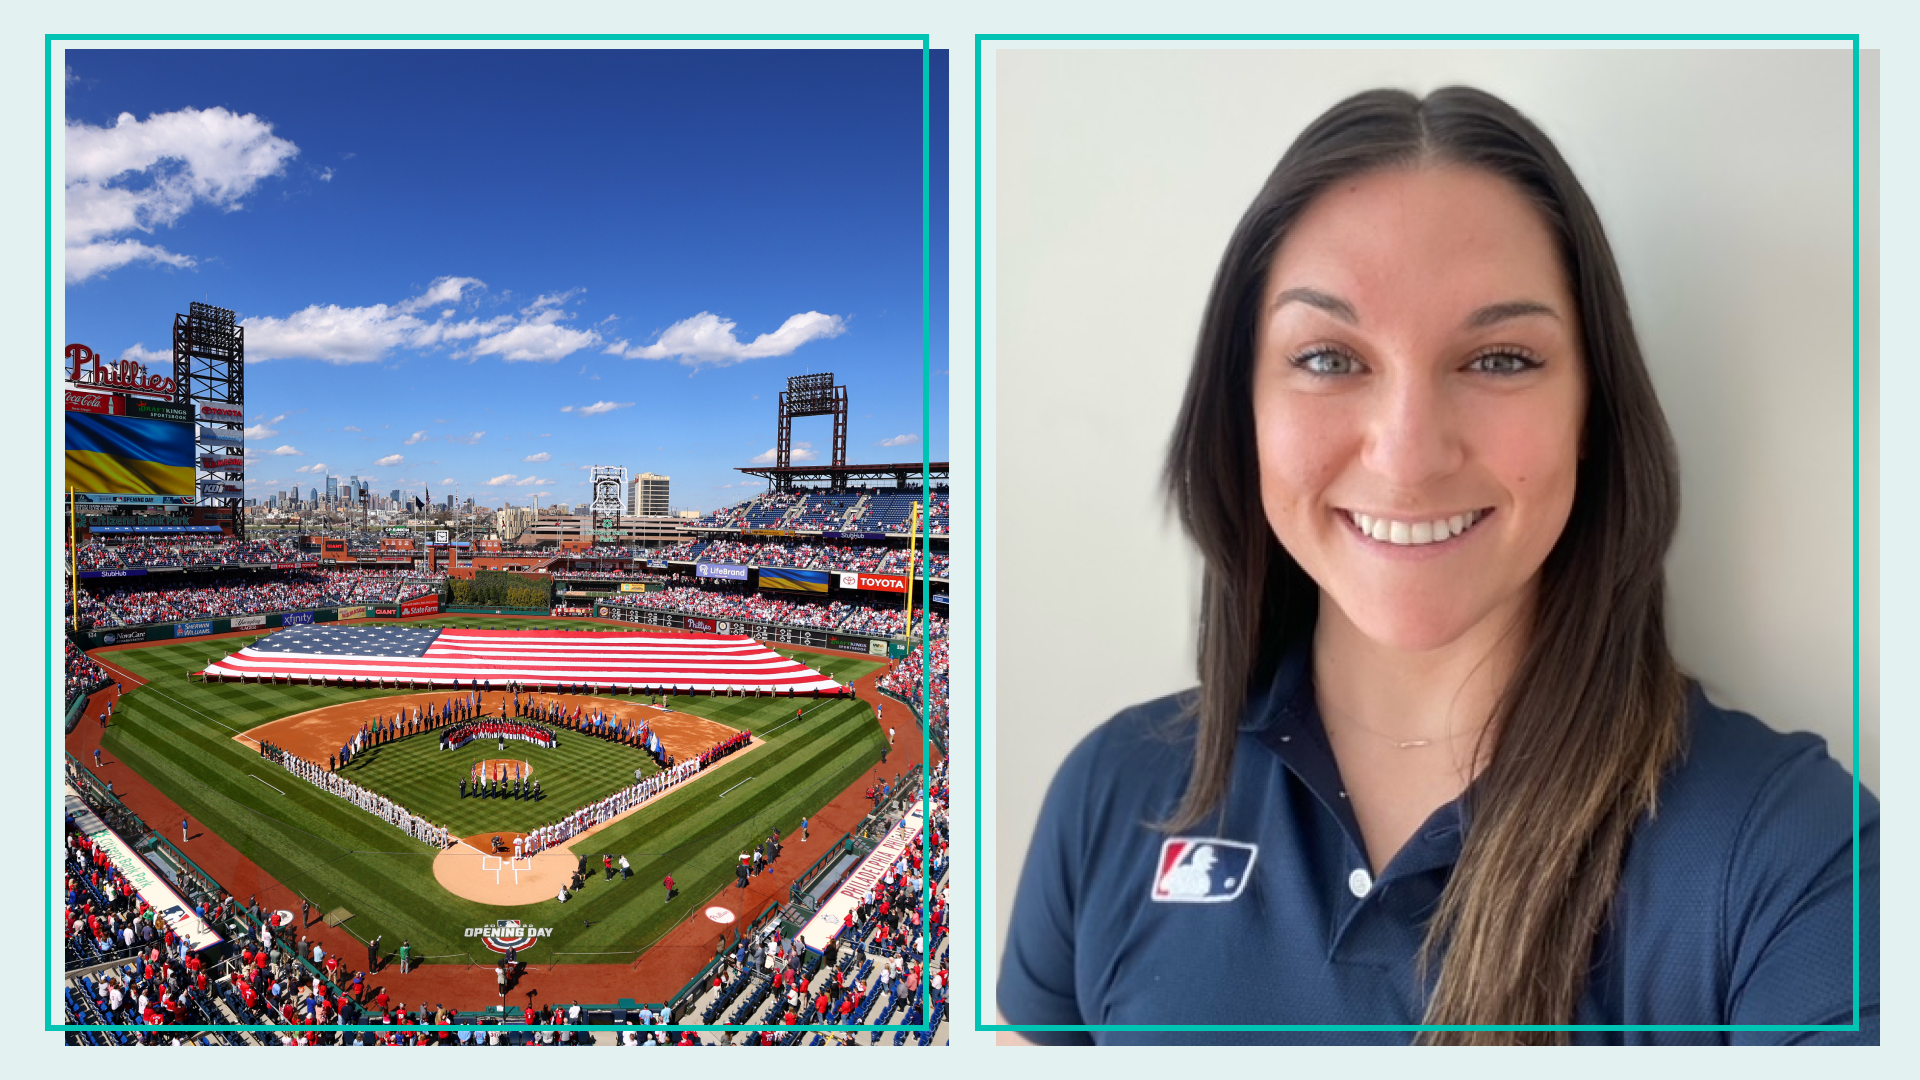 Left: An opening day baseball game between the Oakland Athletics and Philadelphia Phillies. Right: Headshot of Julia Hernandez, MLB’s coordinator of on-field operation.